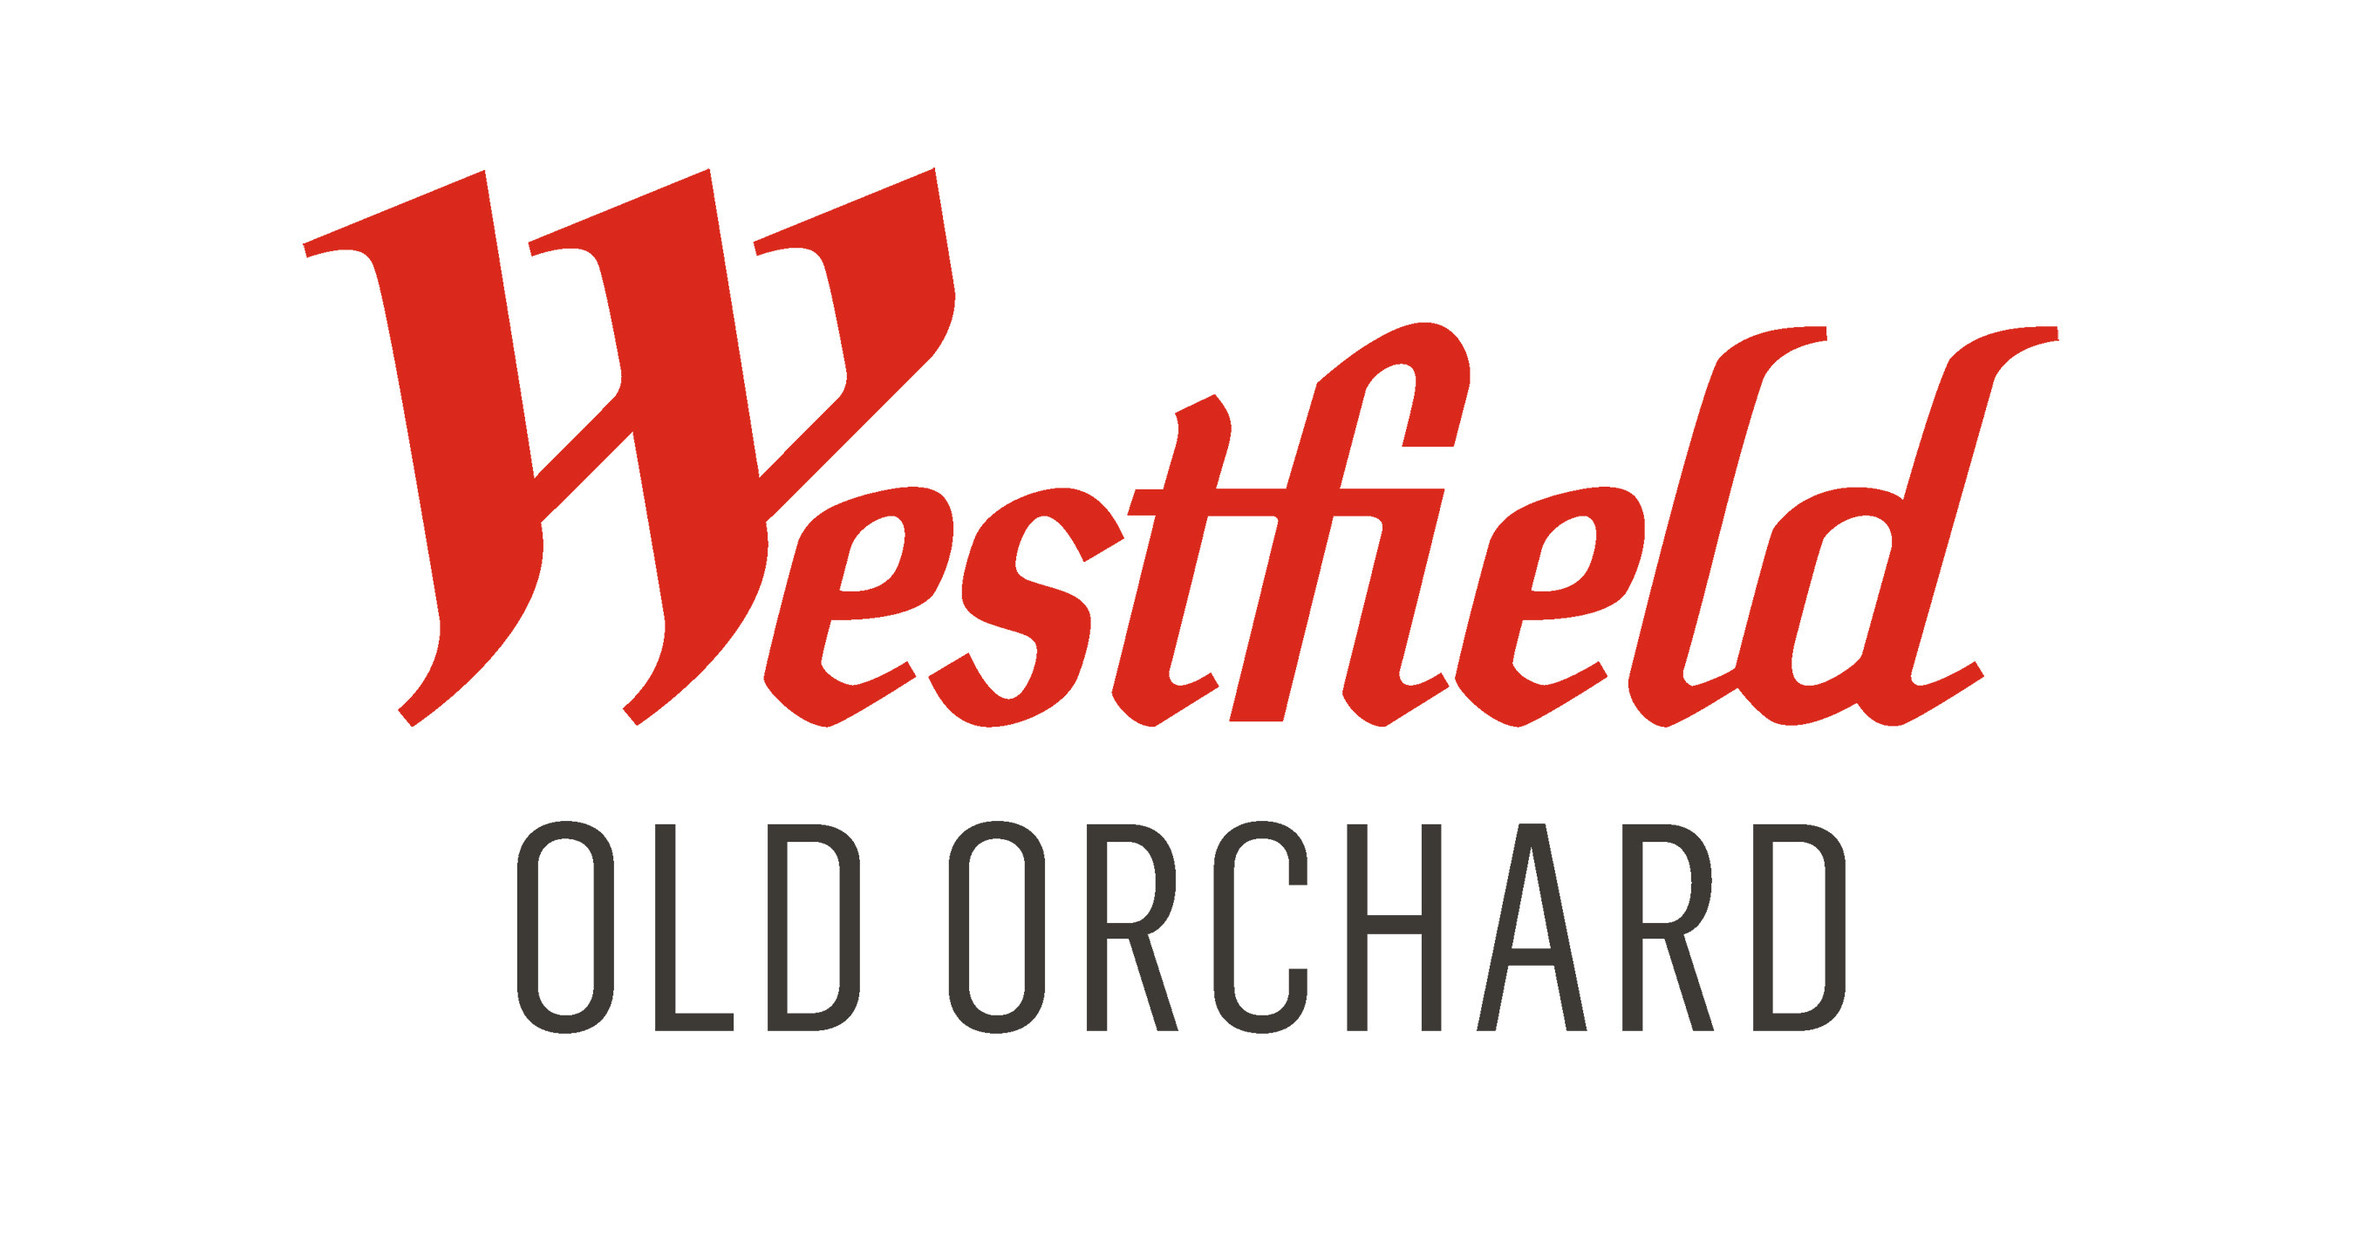 Westfield Old Orchard - Wikipedia